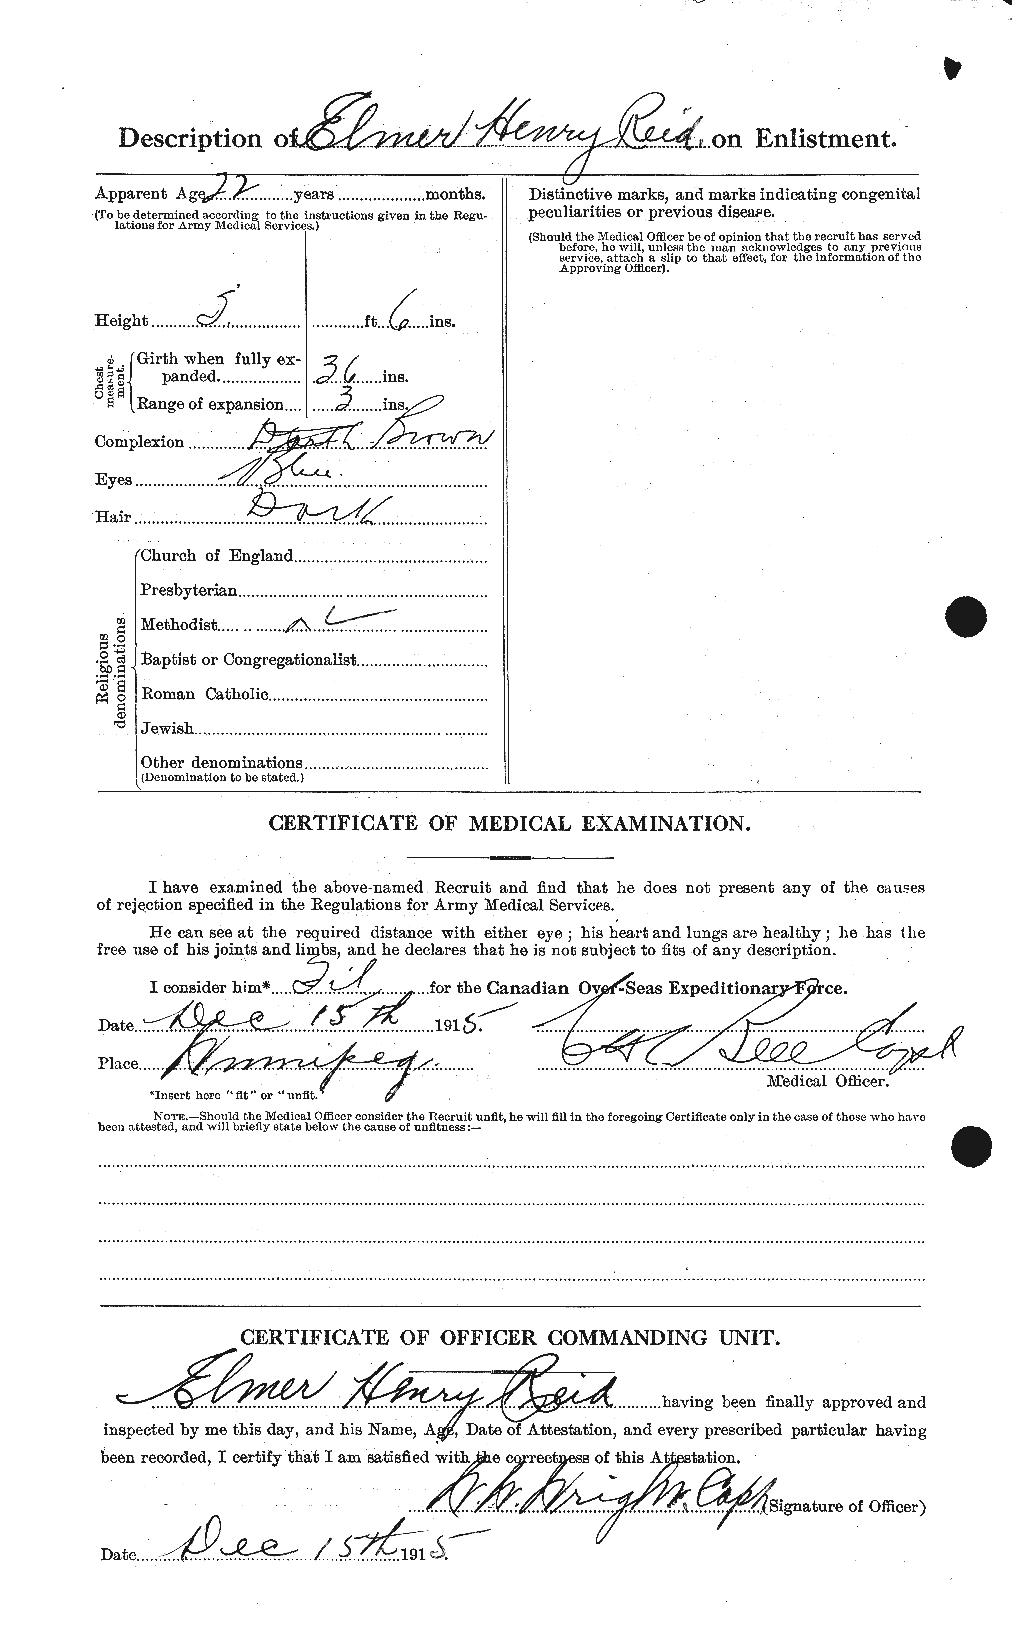 Personnel Records of the First World War - CEF 598001b